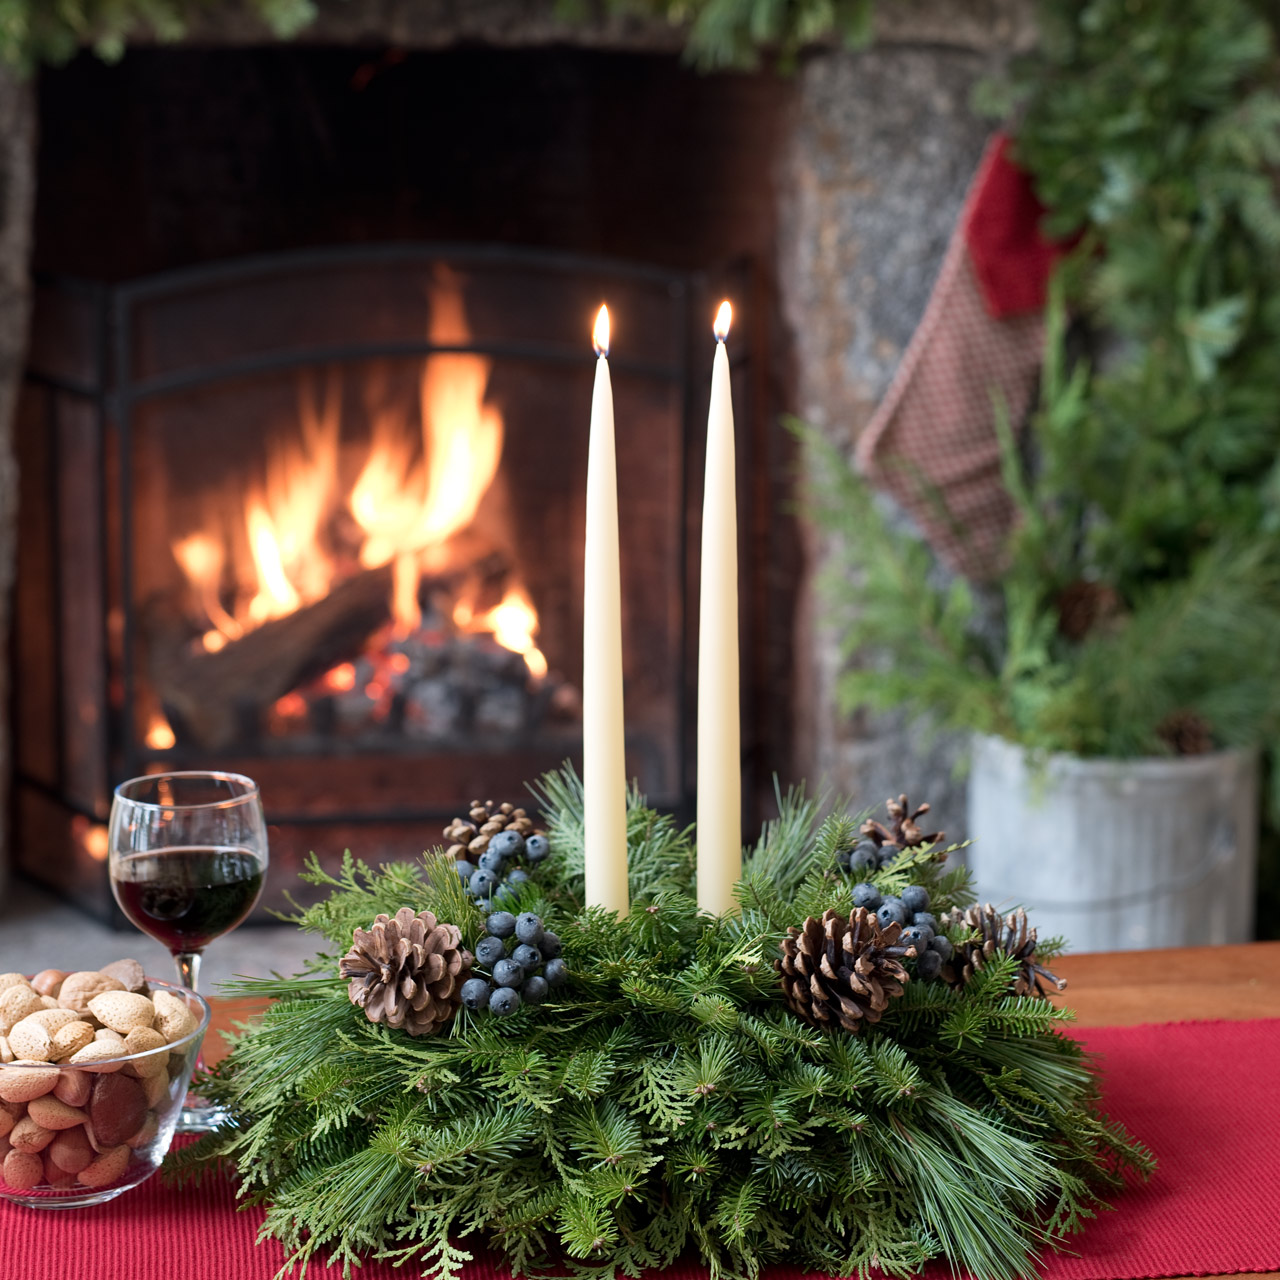 blueberry-fresh-table-centerpieces-ivory-candles-fireplace.jpg